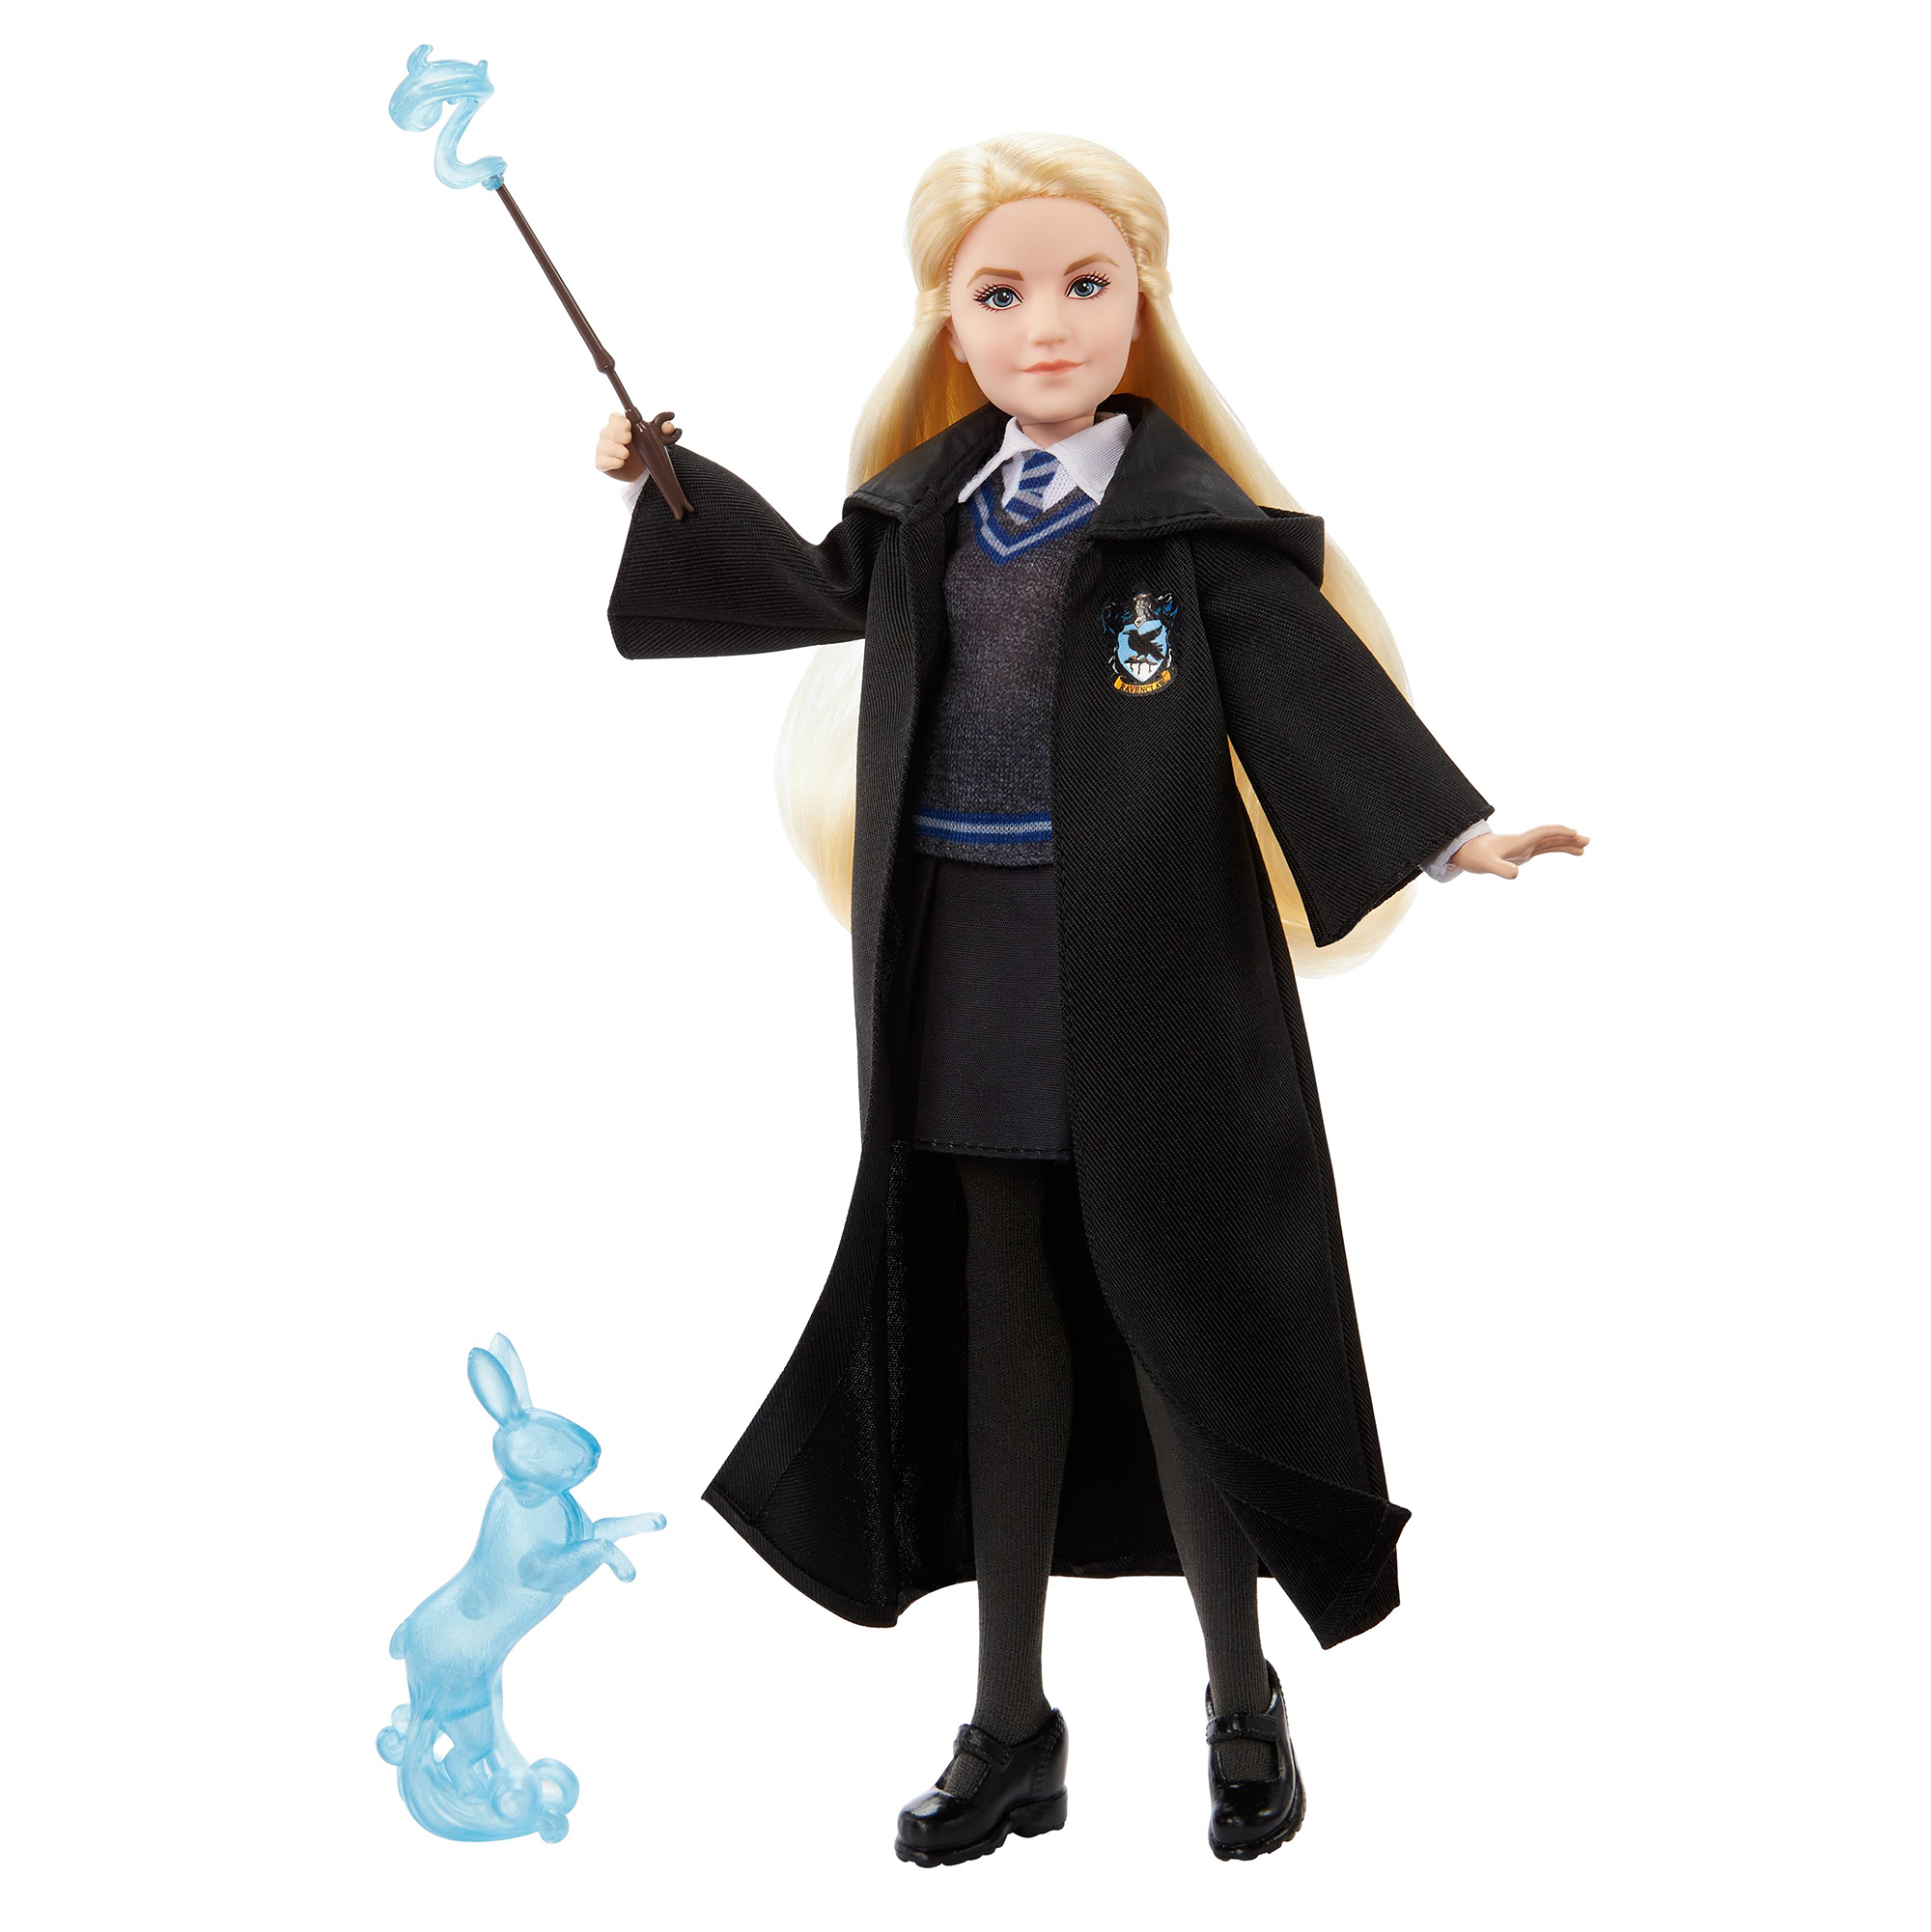 Skubbe variabel længde New Harry Potter dolls from Mattel: Draco Malfoy and Luna Lovegood in  school outfits - YouLoveIt.com